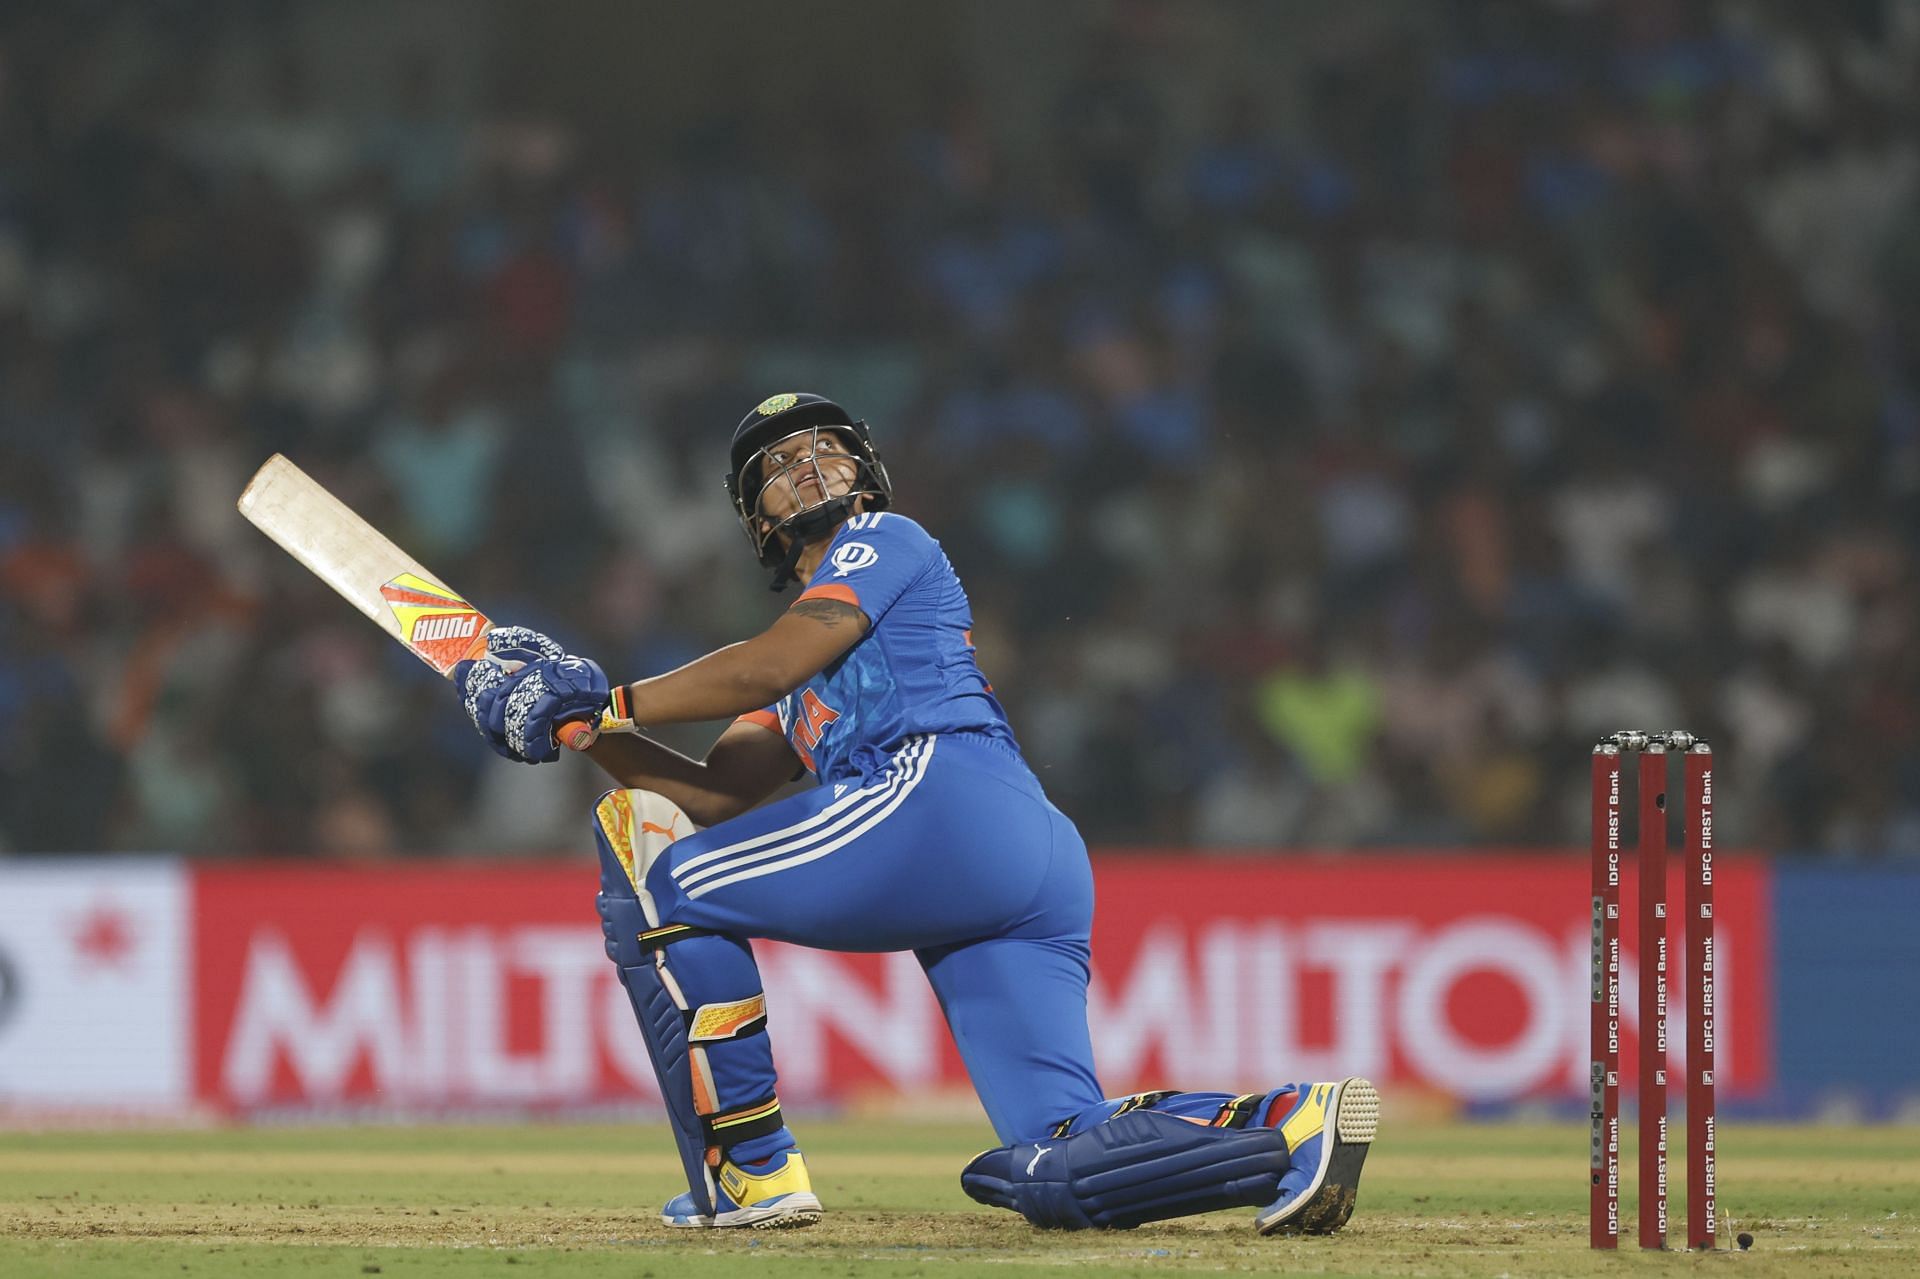 Richa Ghosh is known for her destructive ability with the bat. [P/C: Getty]